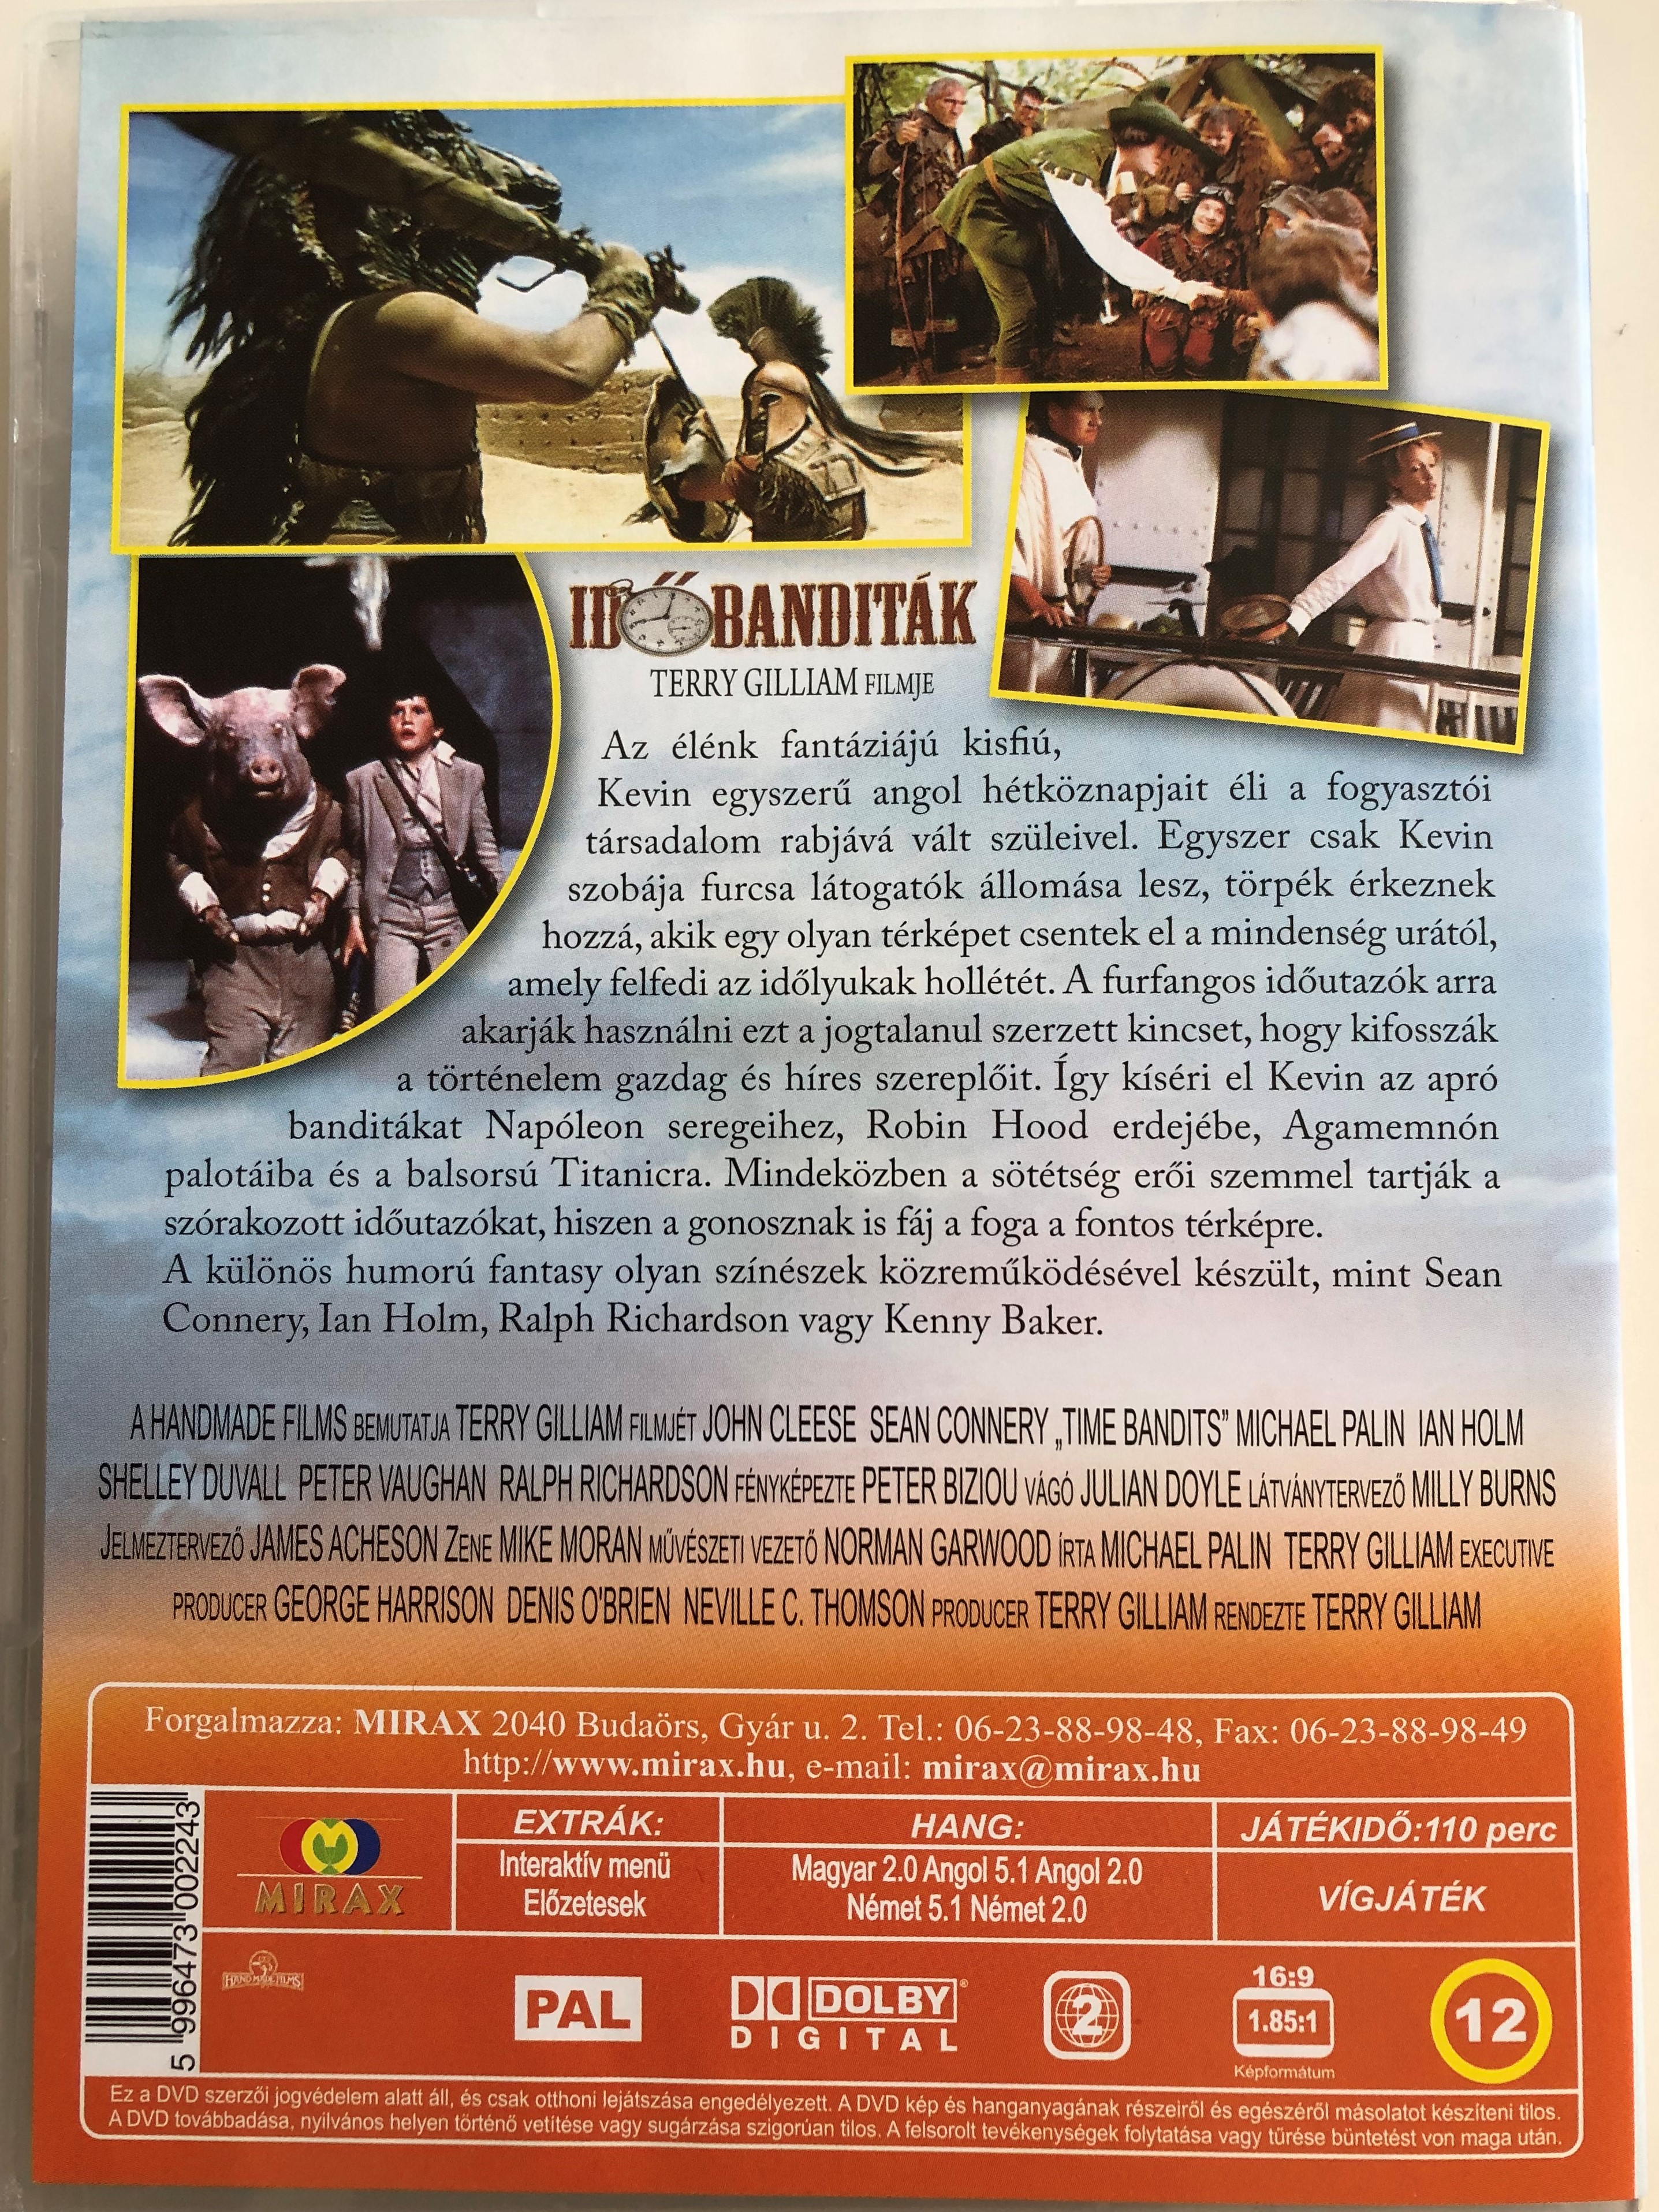 Time Bandits DVD 1981 Időbanditák / Directed by Terry Gilliam / Starring:  John Cleese, Sean Connery, Shelley Duvall, Katherine Helmond, Ian Holm -  Bible in My Language